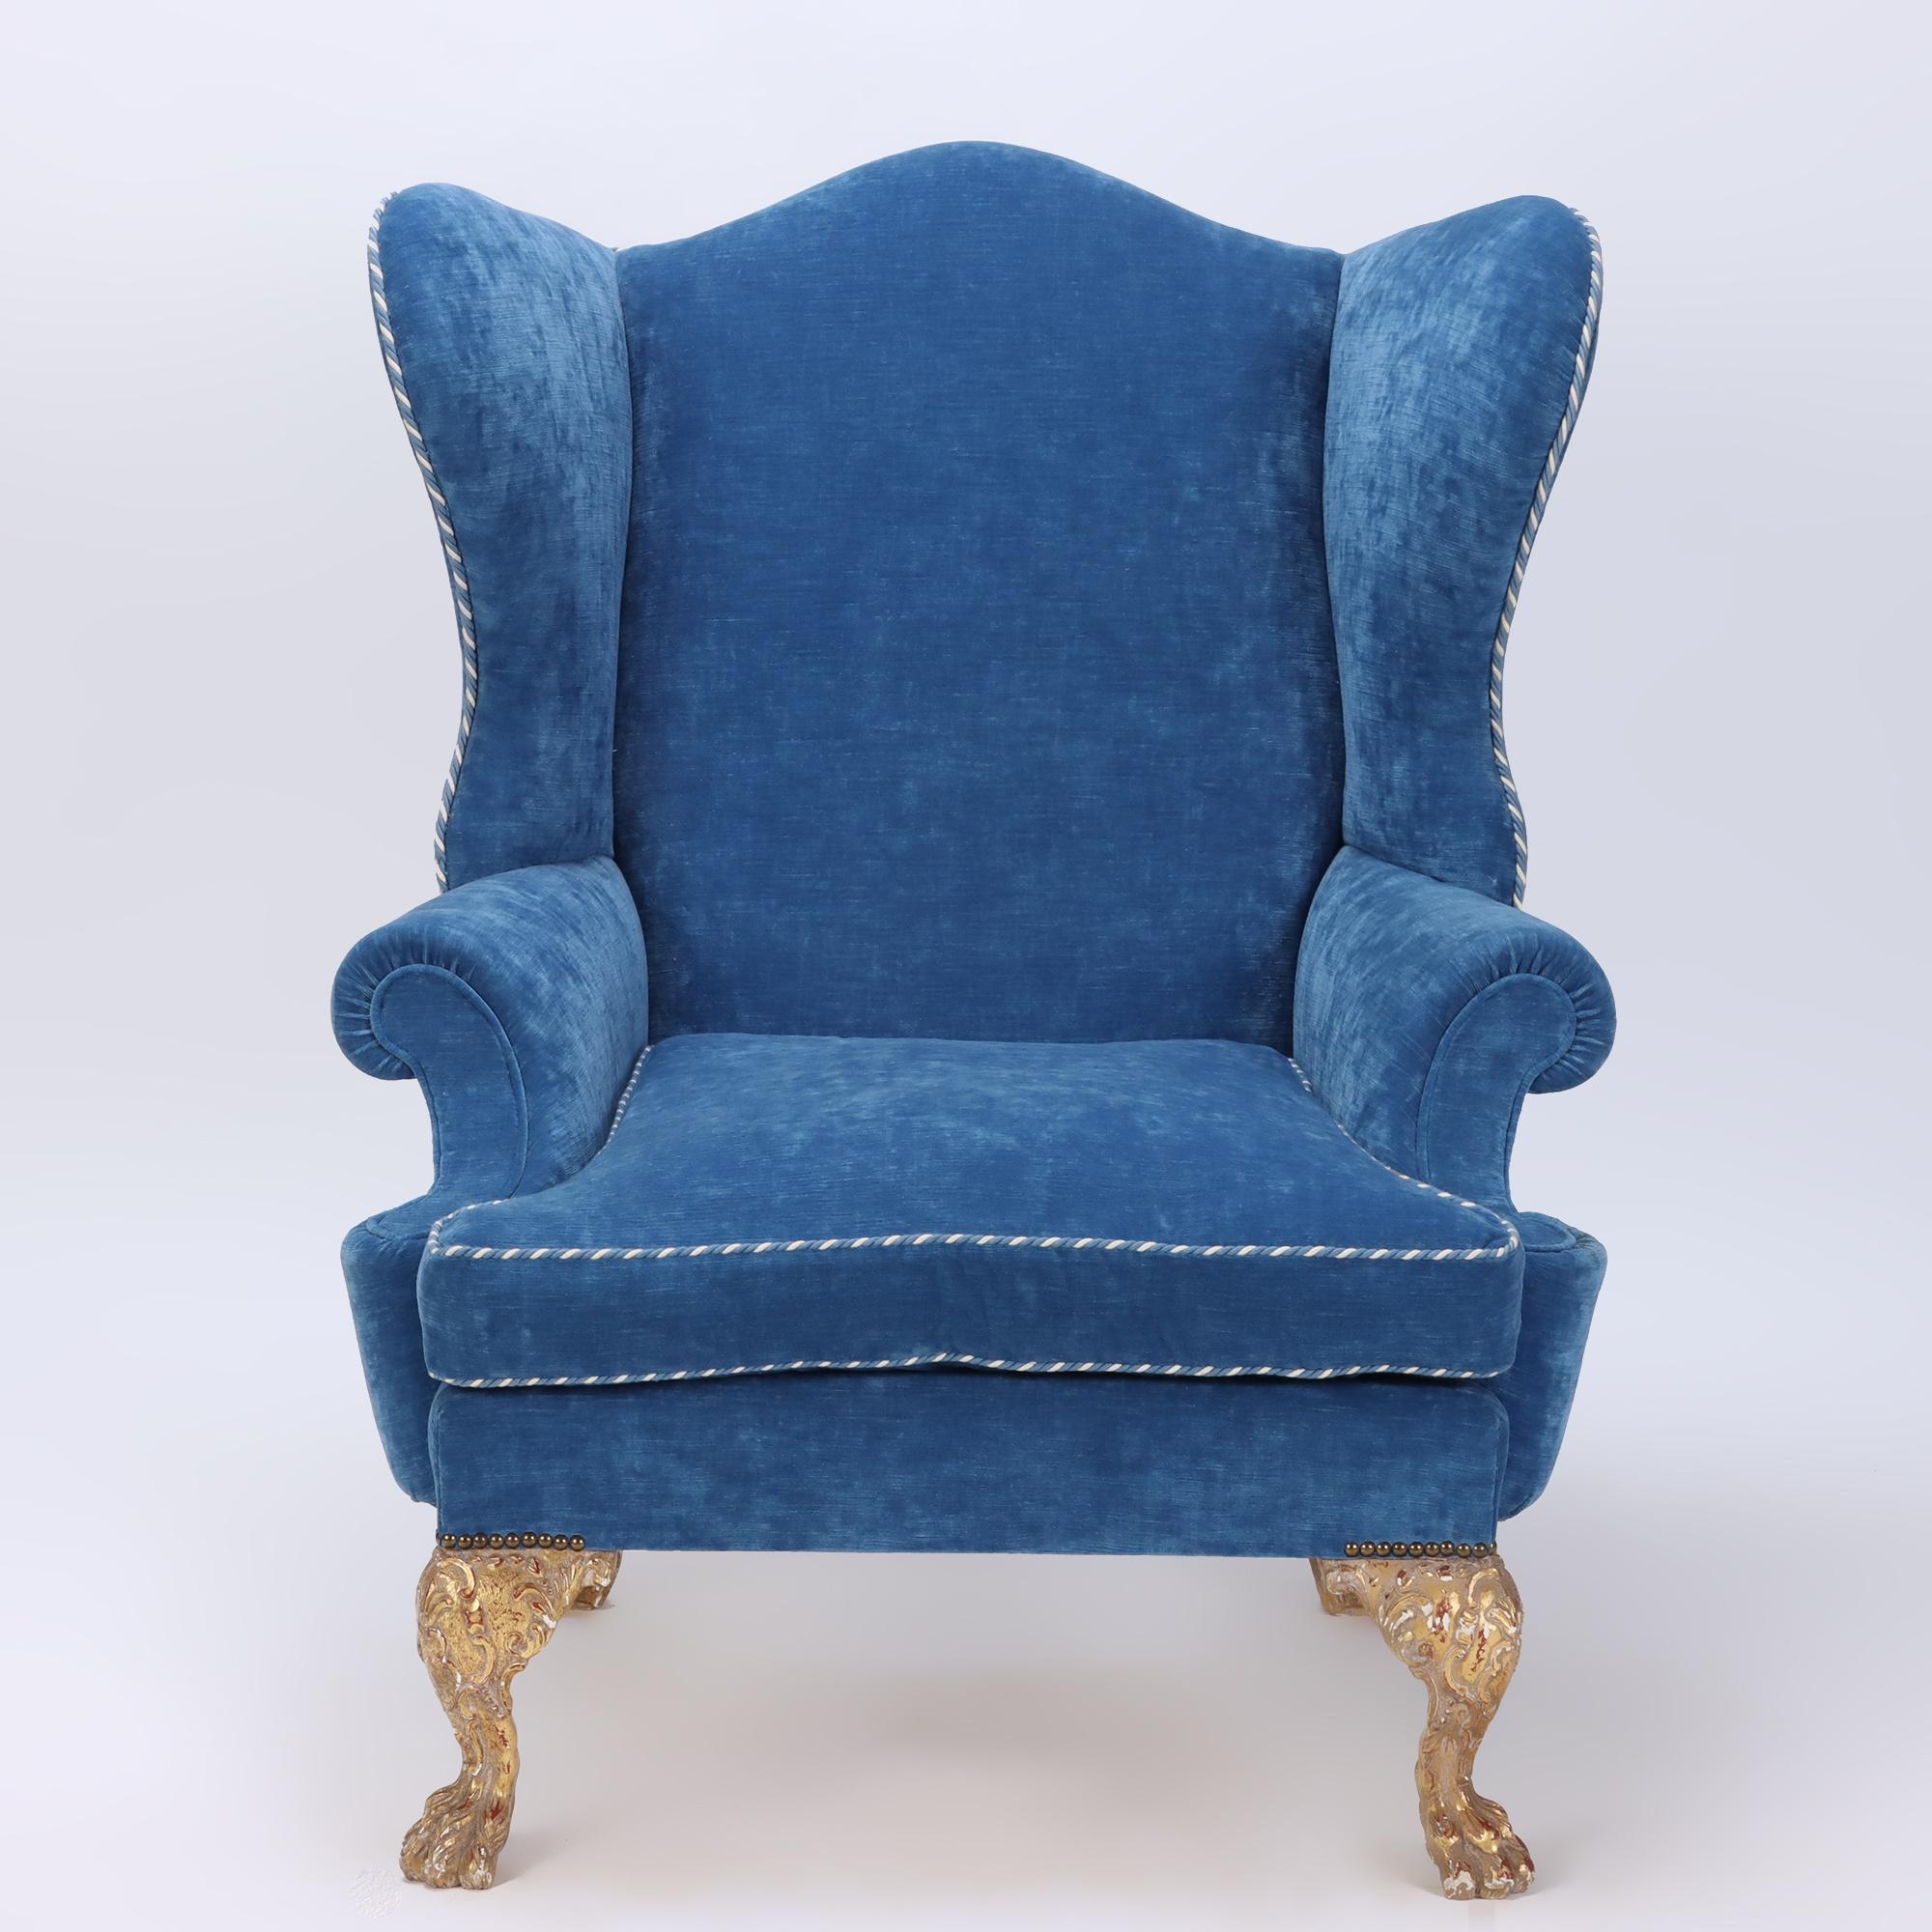 An oversized and exaggerated blue upholstered wing chair and ottoman C 1900 with gilt carved feet. A statement piece for sure!. 
Ottoman: 25